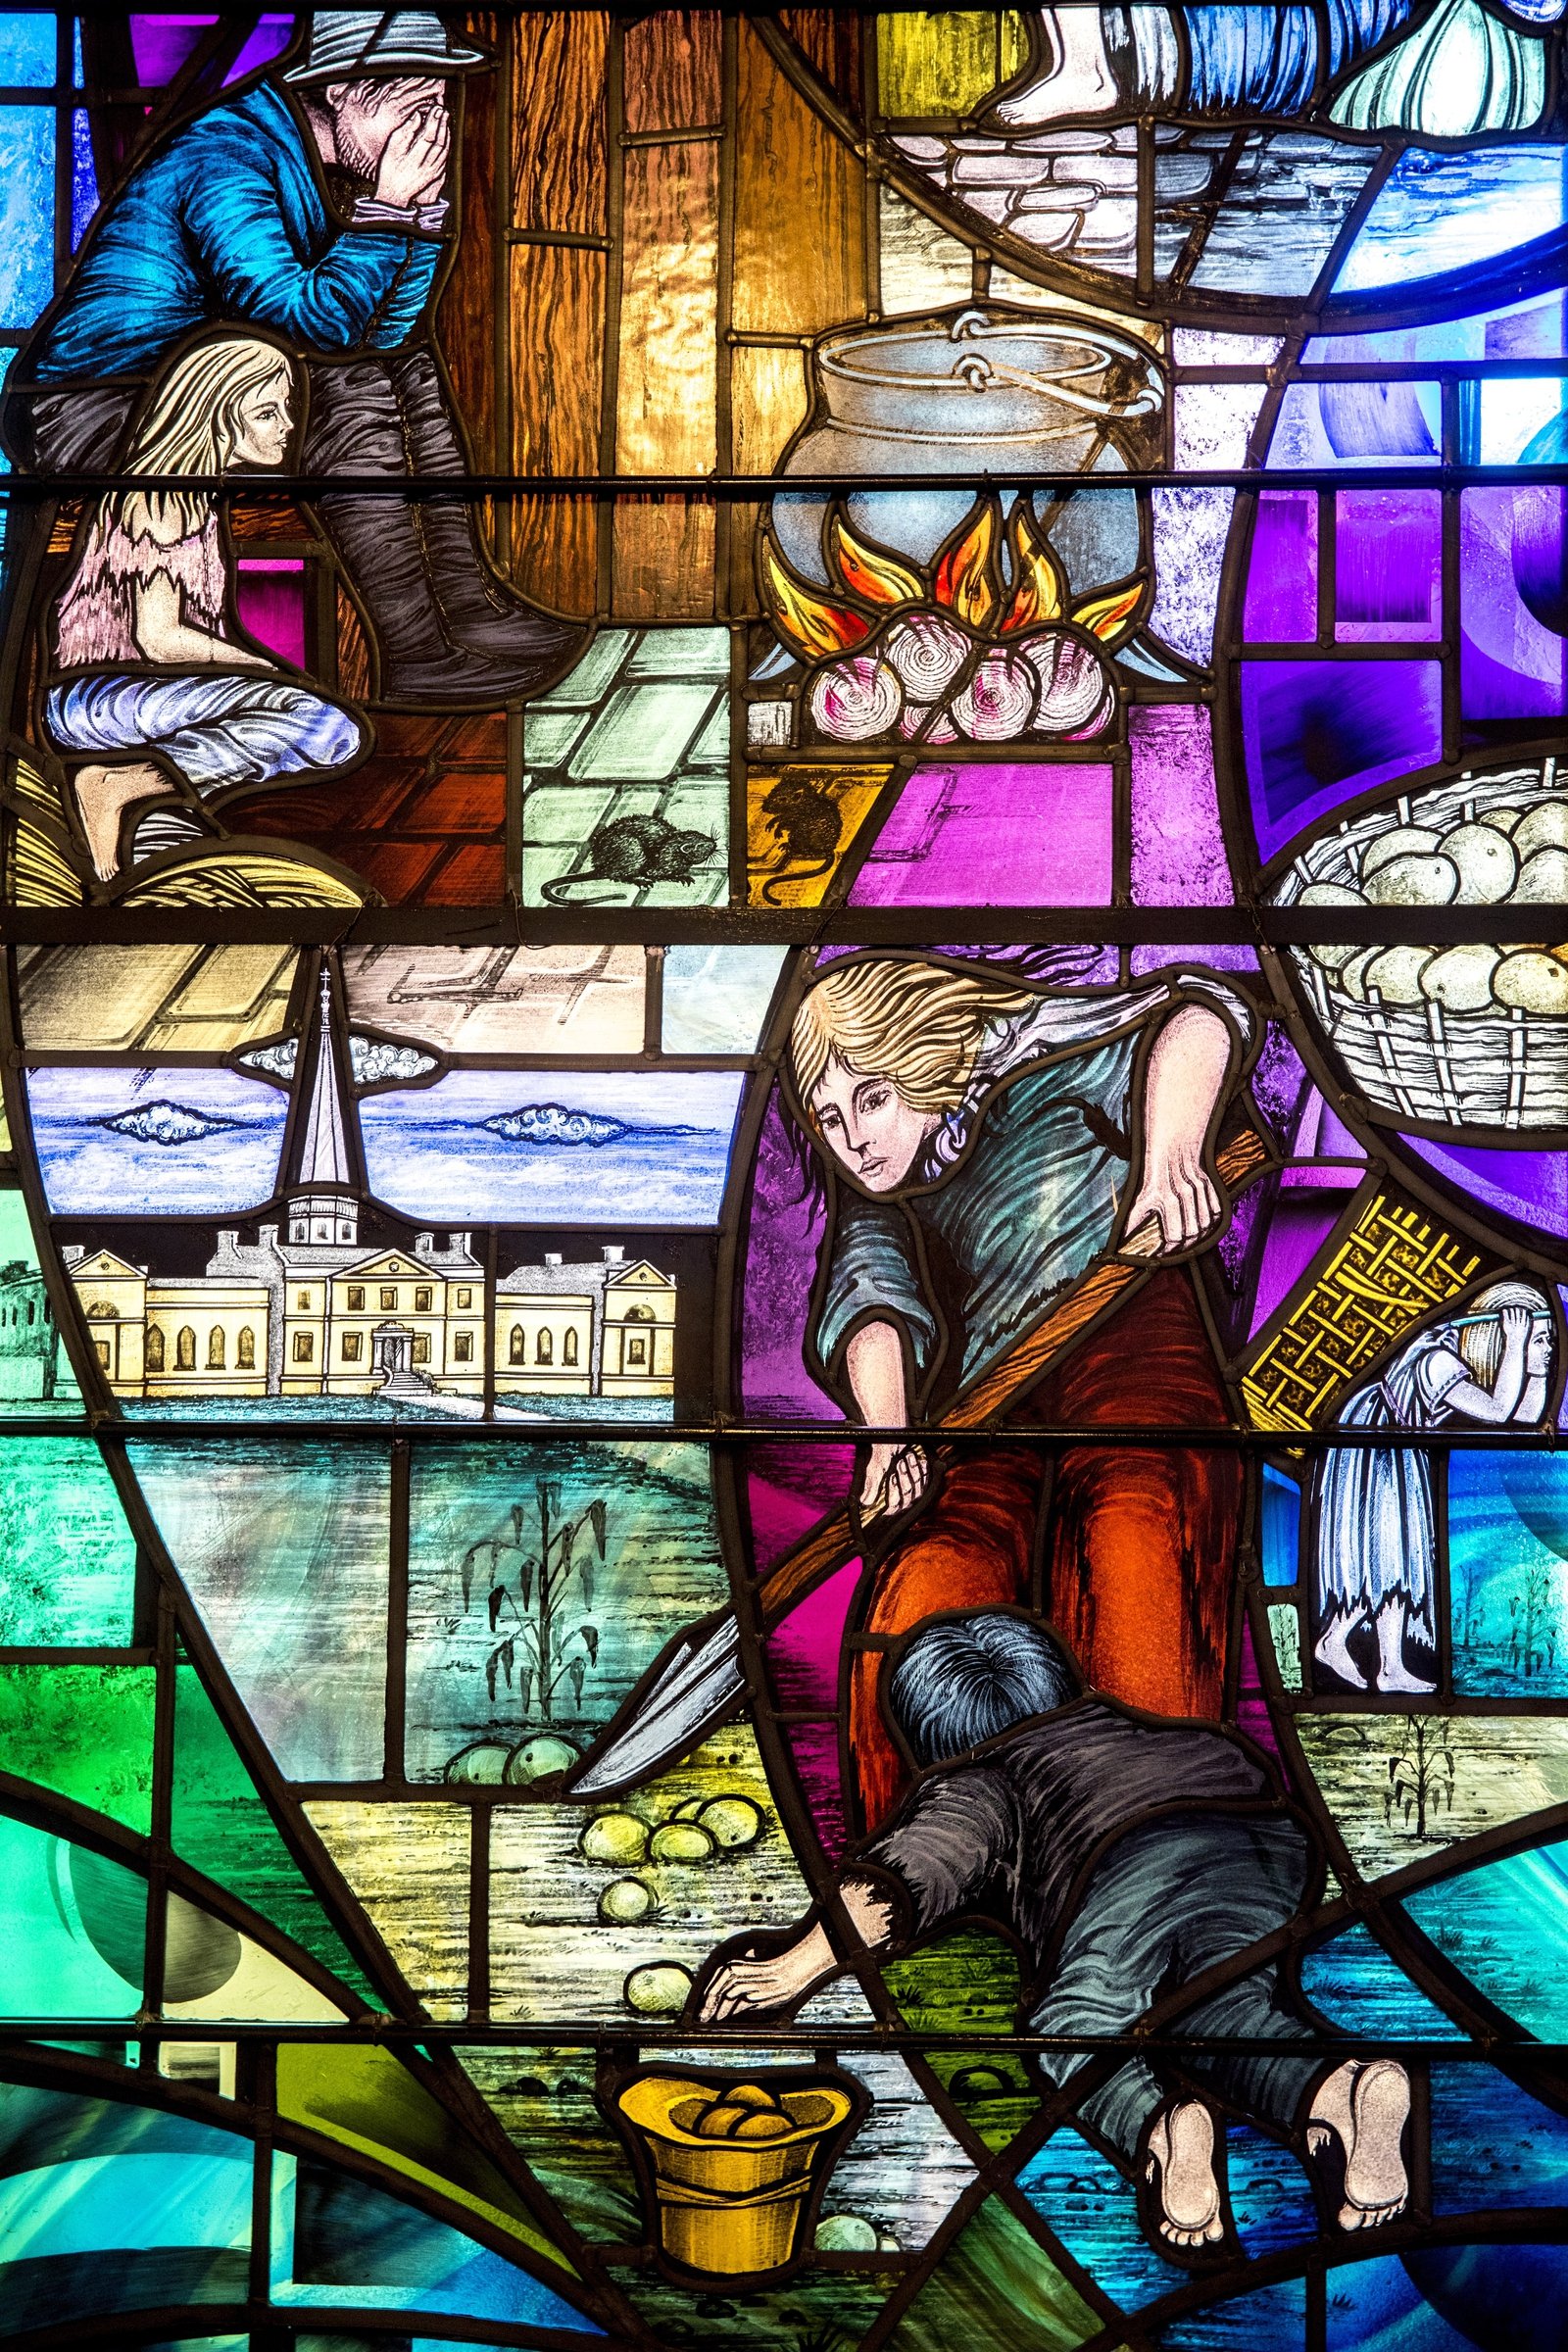 Image - The Famine window in Belfast City Hall. Photo: Godong/Universal Images Group via Getty Images